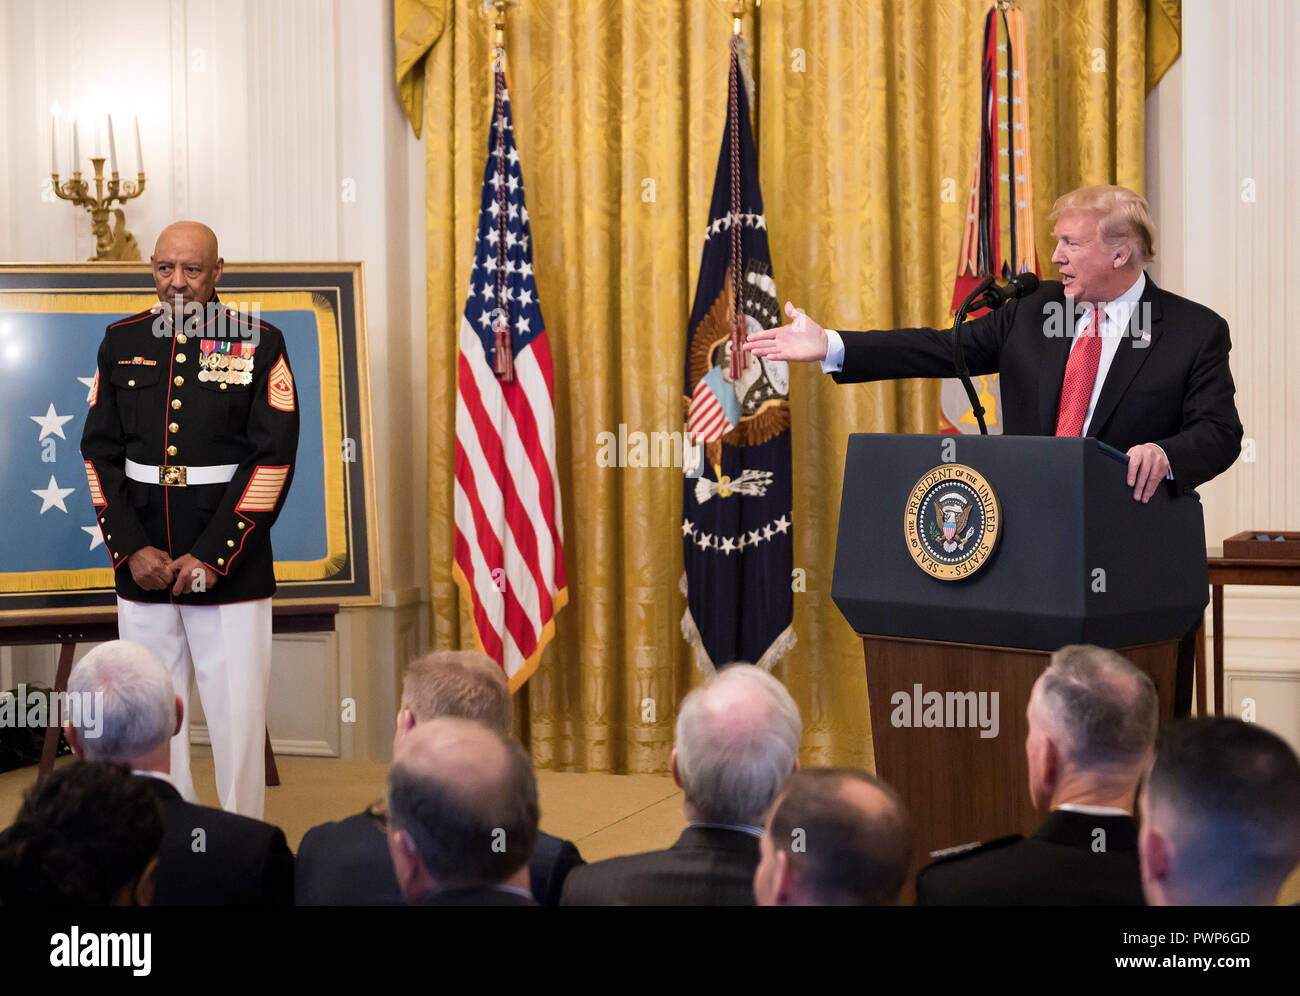 Washington, USA. 17th Oct 2018. United States President Donald J. Trump awards the Medal of Honor to Sergeant Major John L. Canley, US Marine Corps (Retired), for conspicuous gallantry during the Vietnam War in a ceremony in the East Room of the the White House in Washington, DC on Wednesday, October 17, 2018. Credit: Ron Sachs/CNP/MediaPunch Credit: MediaPunch Inc/Alamy Live News Stock Photo